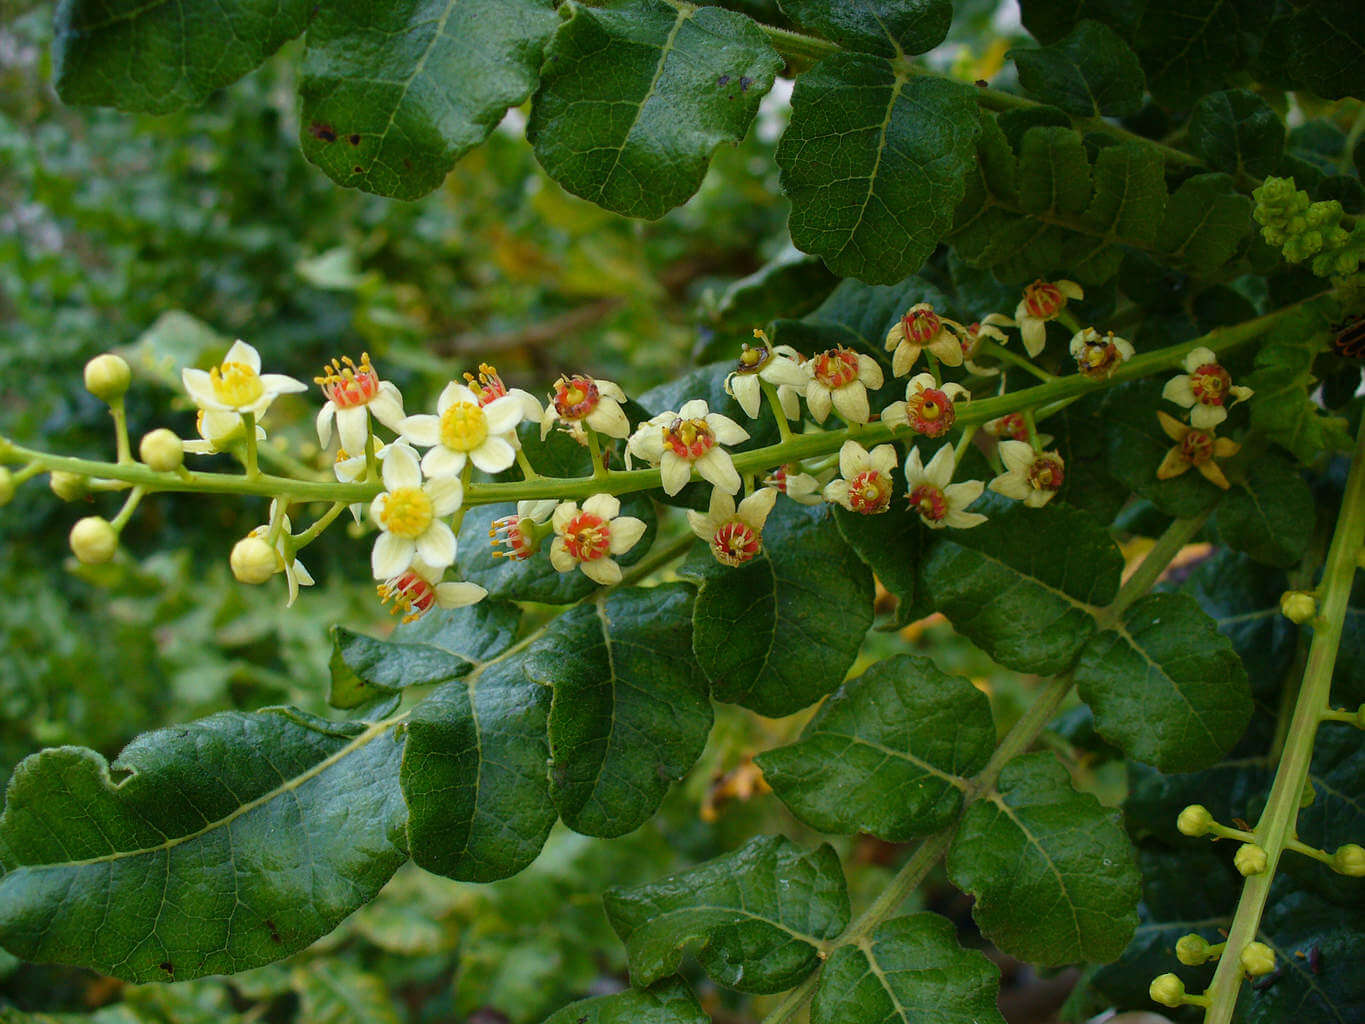 Boswellia sacra yields the most prized Oman frankincense